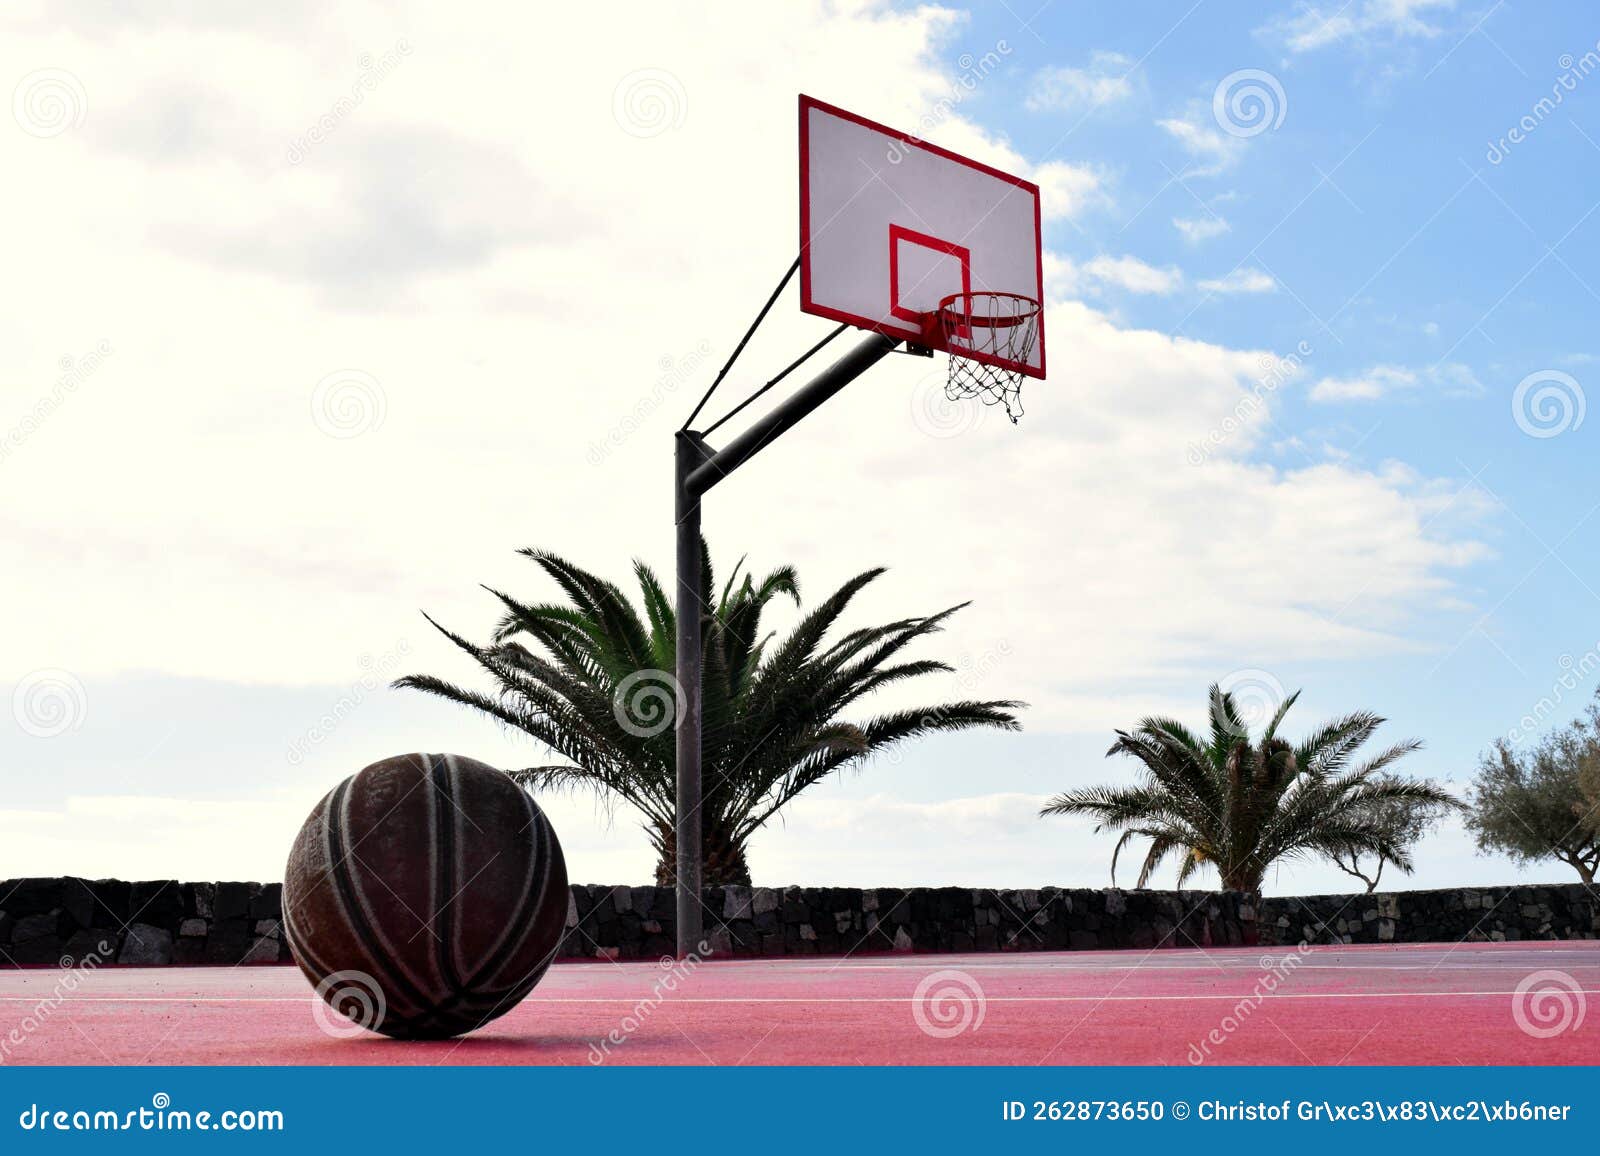 basketball hoop, playground, basketball. basketball hoop in front of the beach